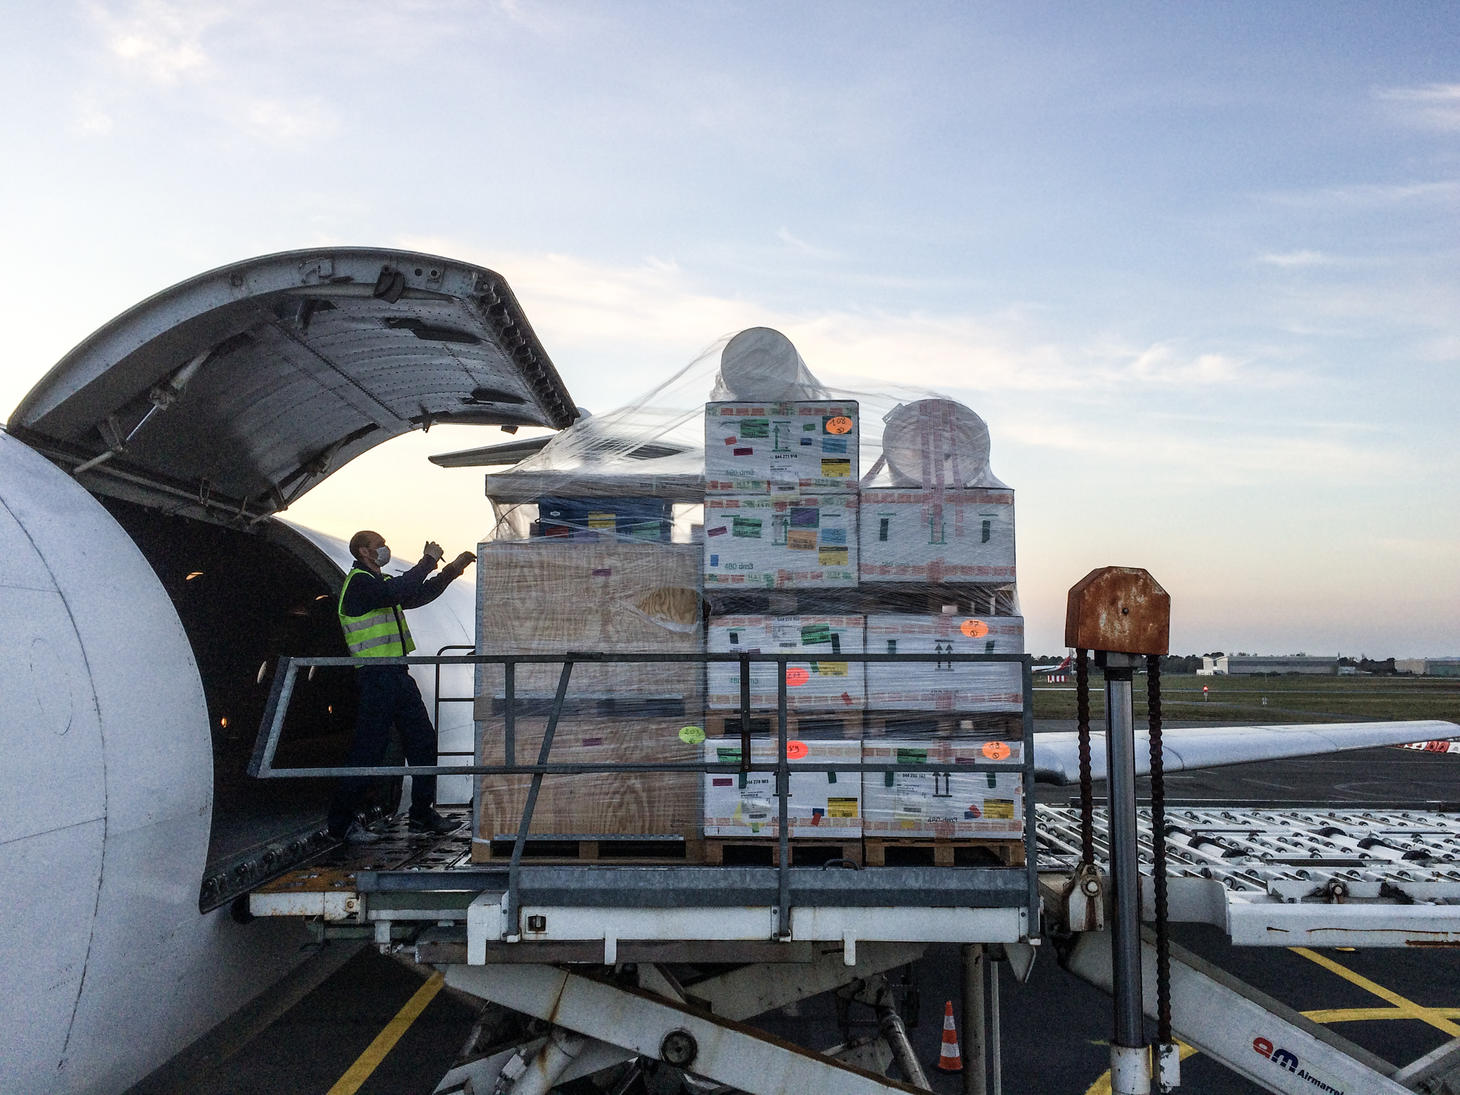 MSF teams are loading medical equipment including inflatable hospital in Merignac airport on 21 March 2020 to be sent to Ispahan, Iran to respond to the coronavirus pandemic.